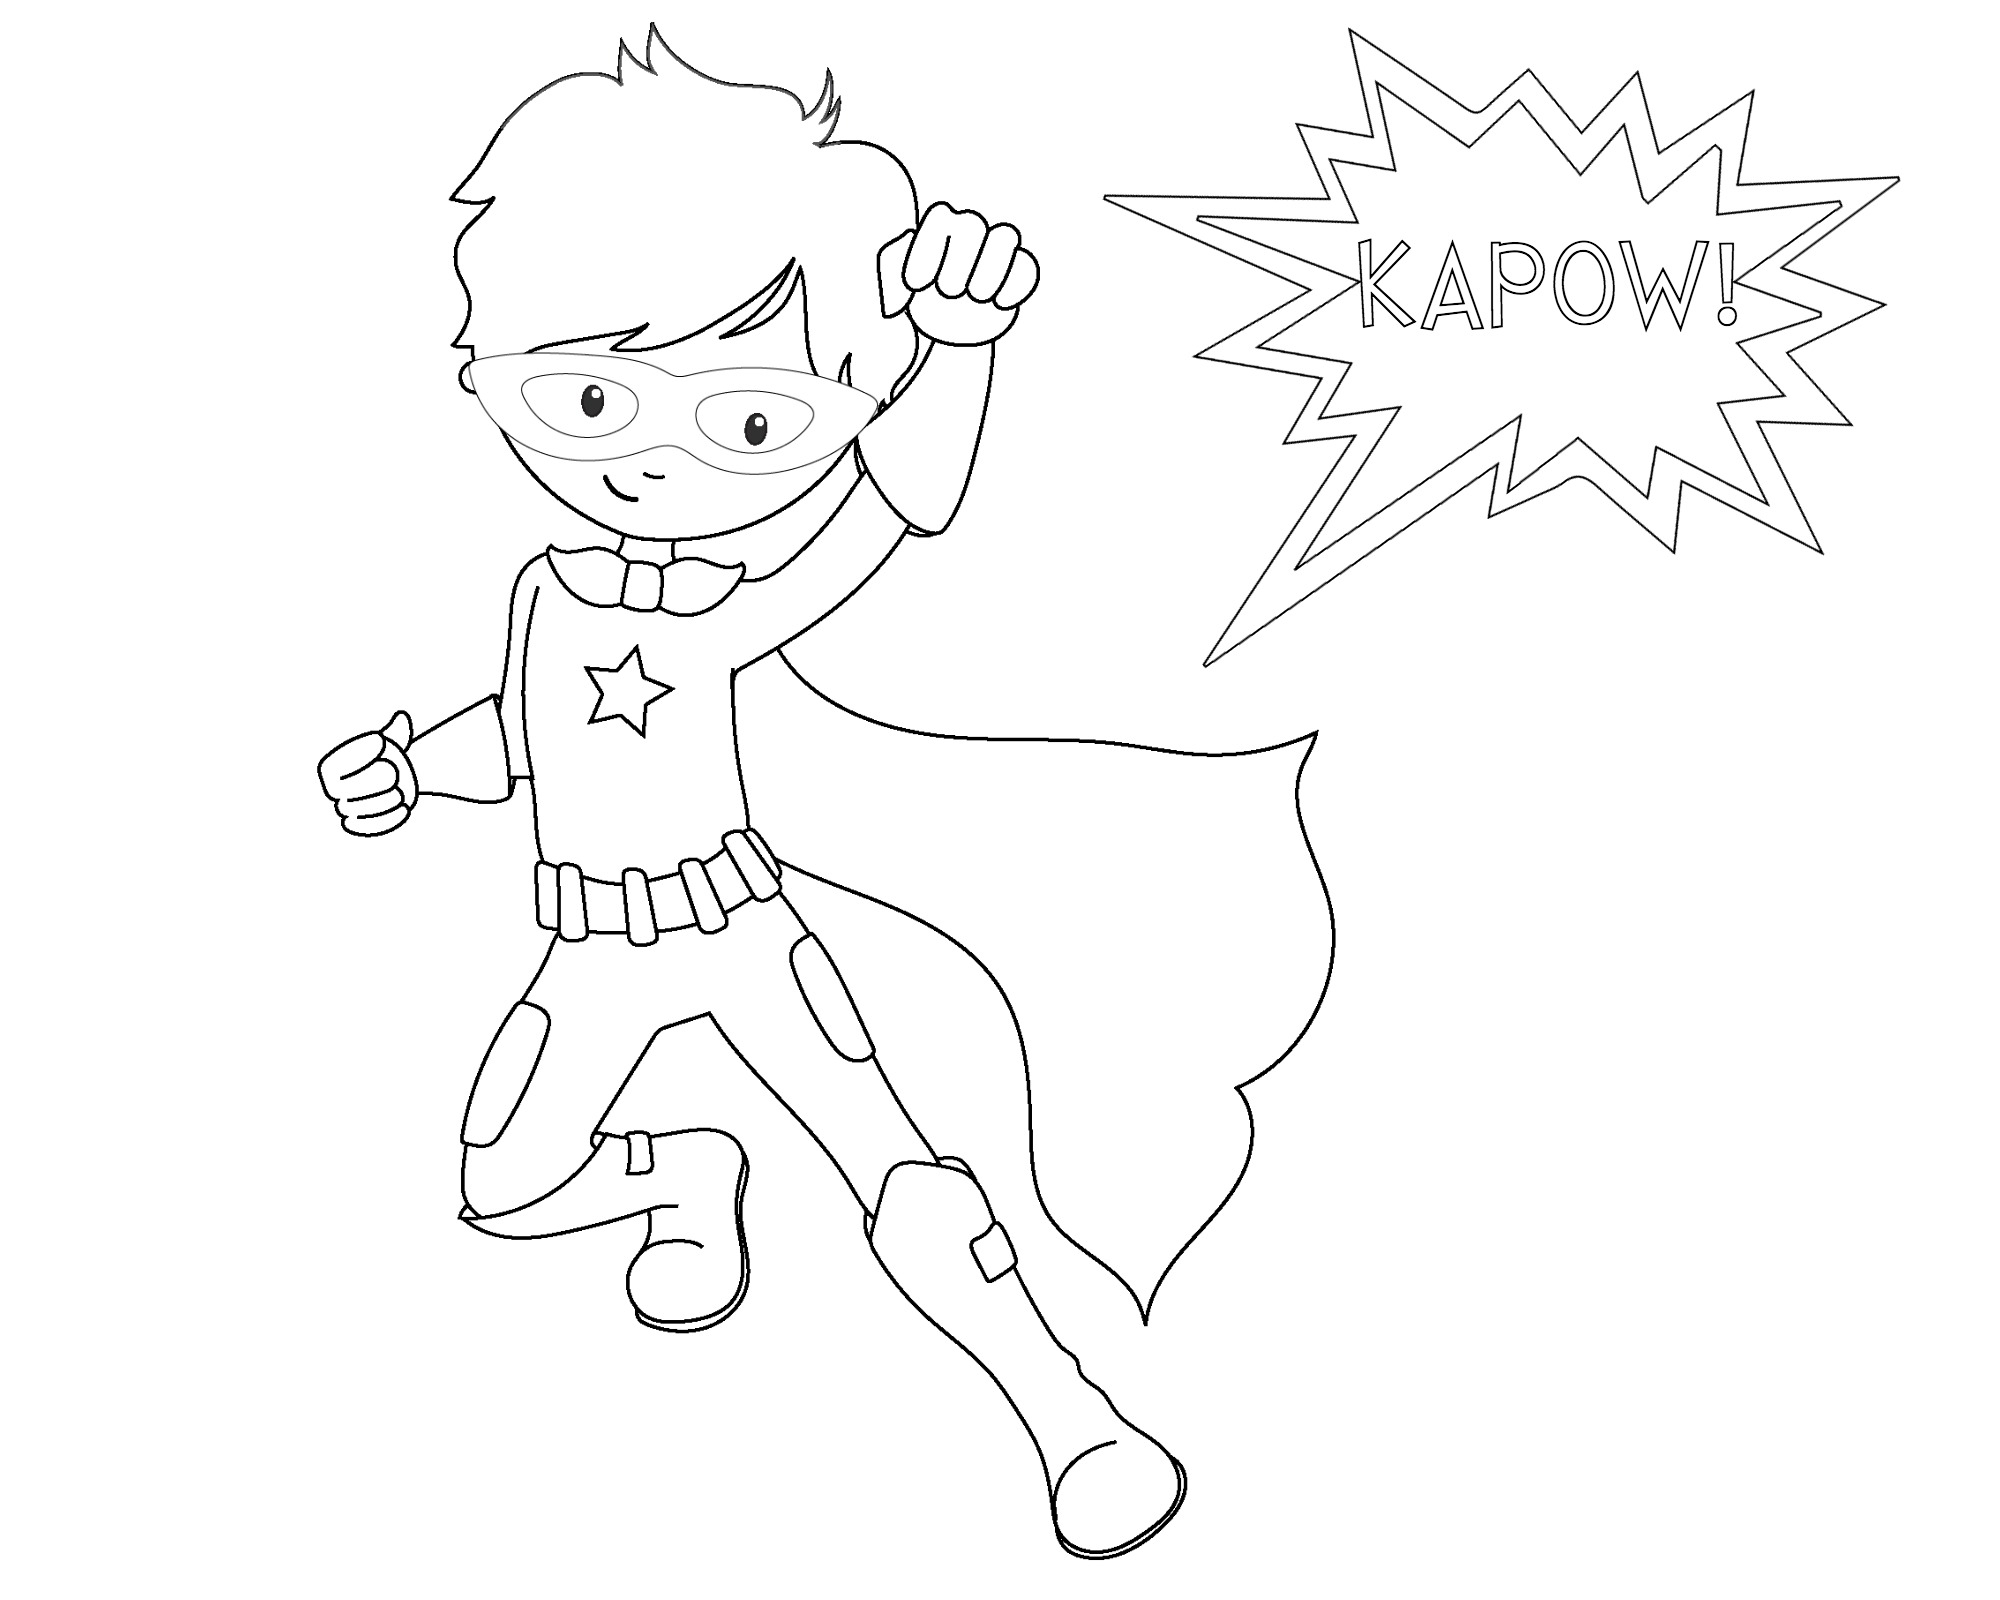 Super Hero Coloring Page Free Printable Superhero Coloring Sheets For Kids Crazy Little